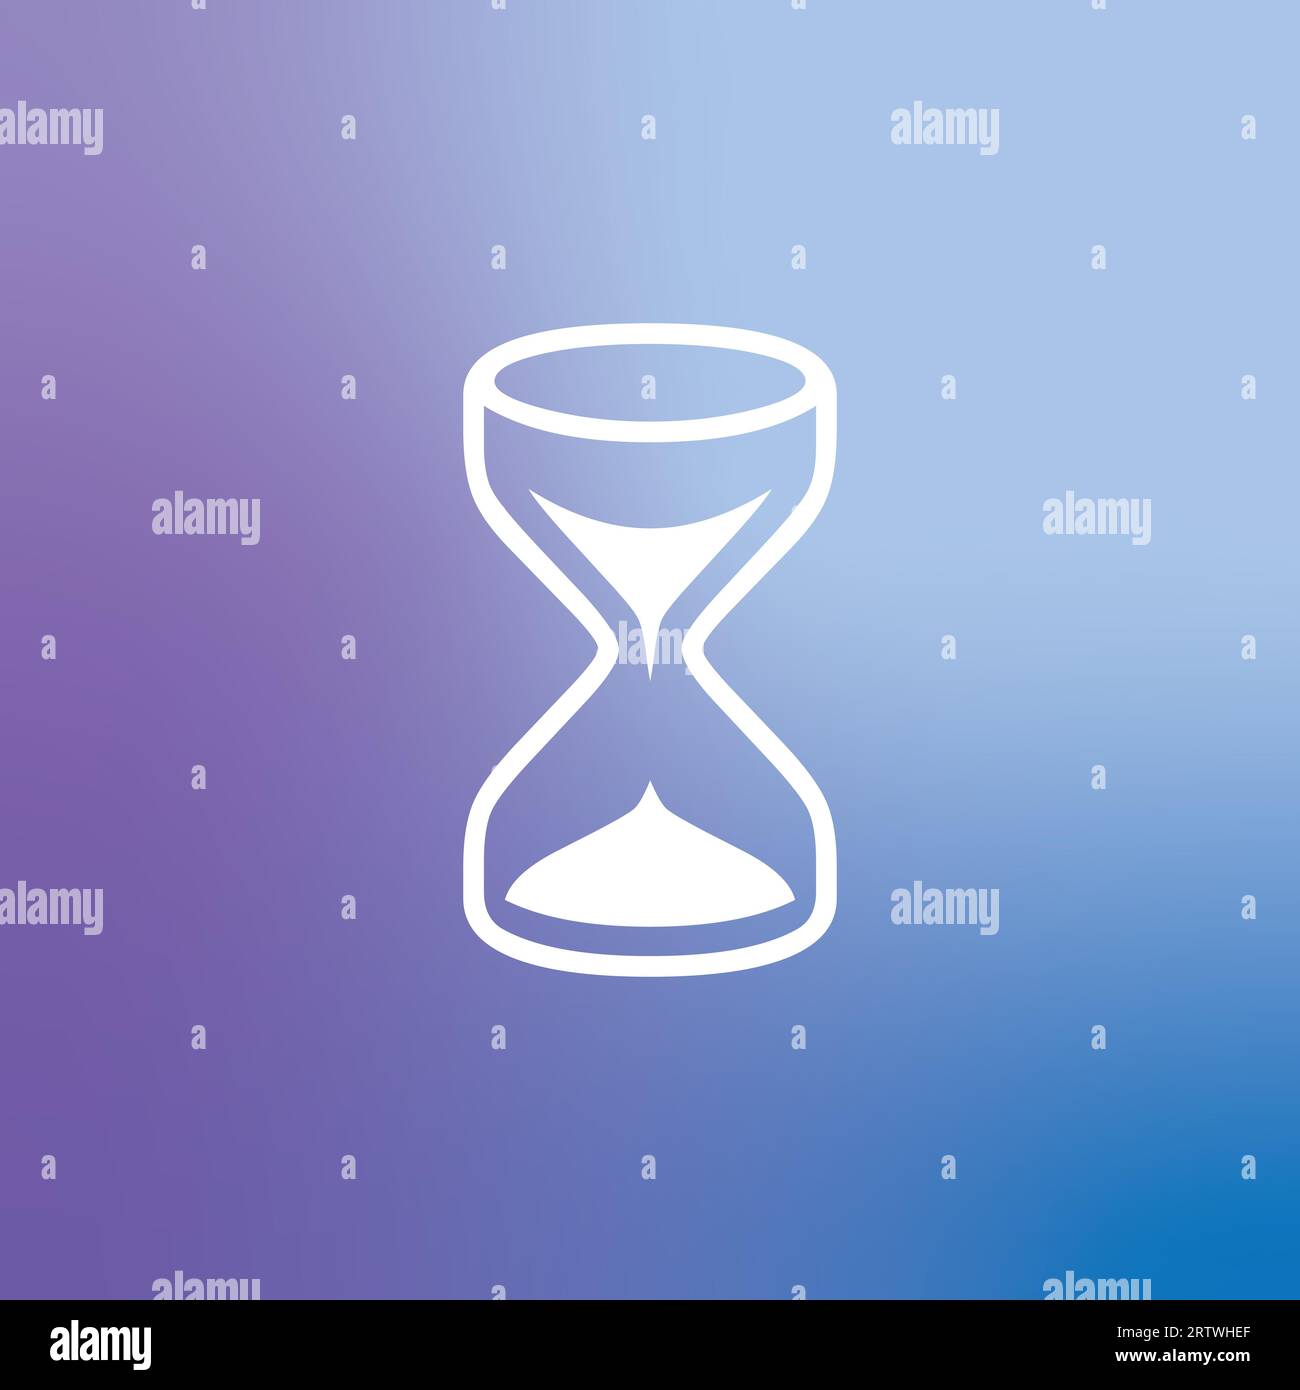 A symbols of Timer on aisolated gradient background. Stock Vector